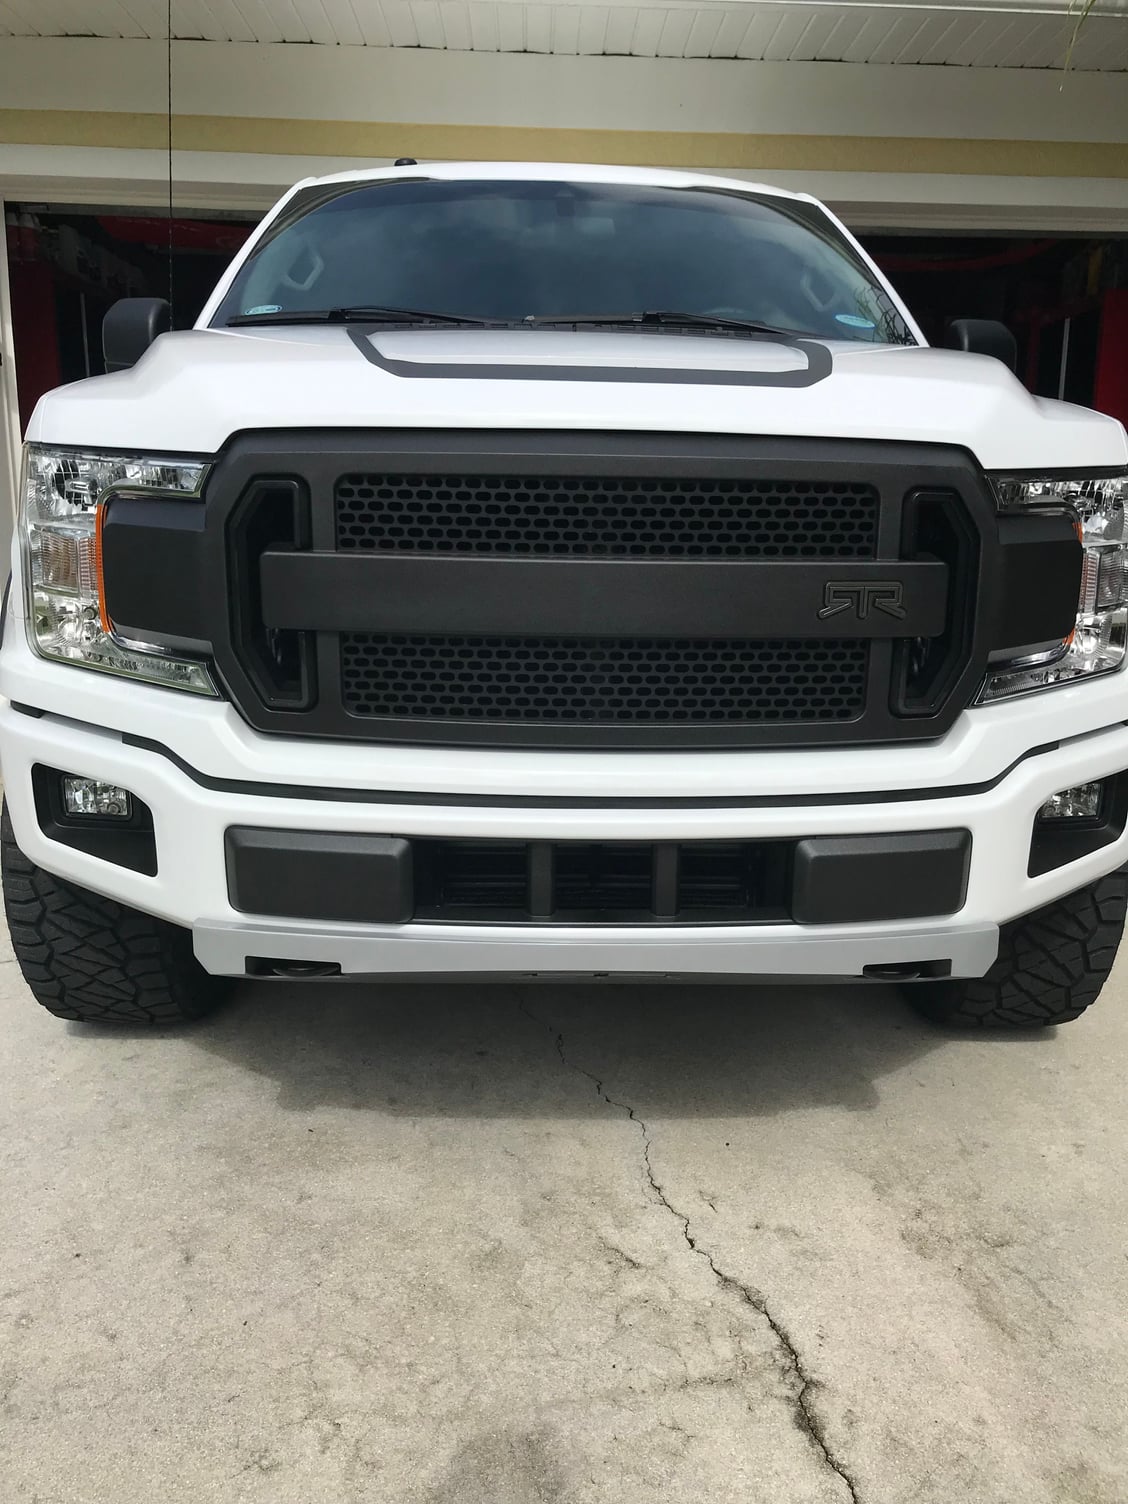 Did I over pay? - Ford F150 Forum - Community of Ford Truck Fans